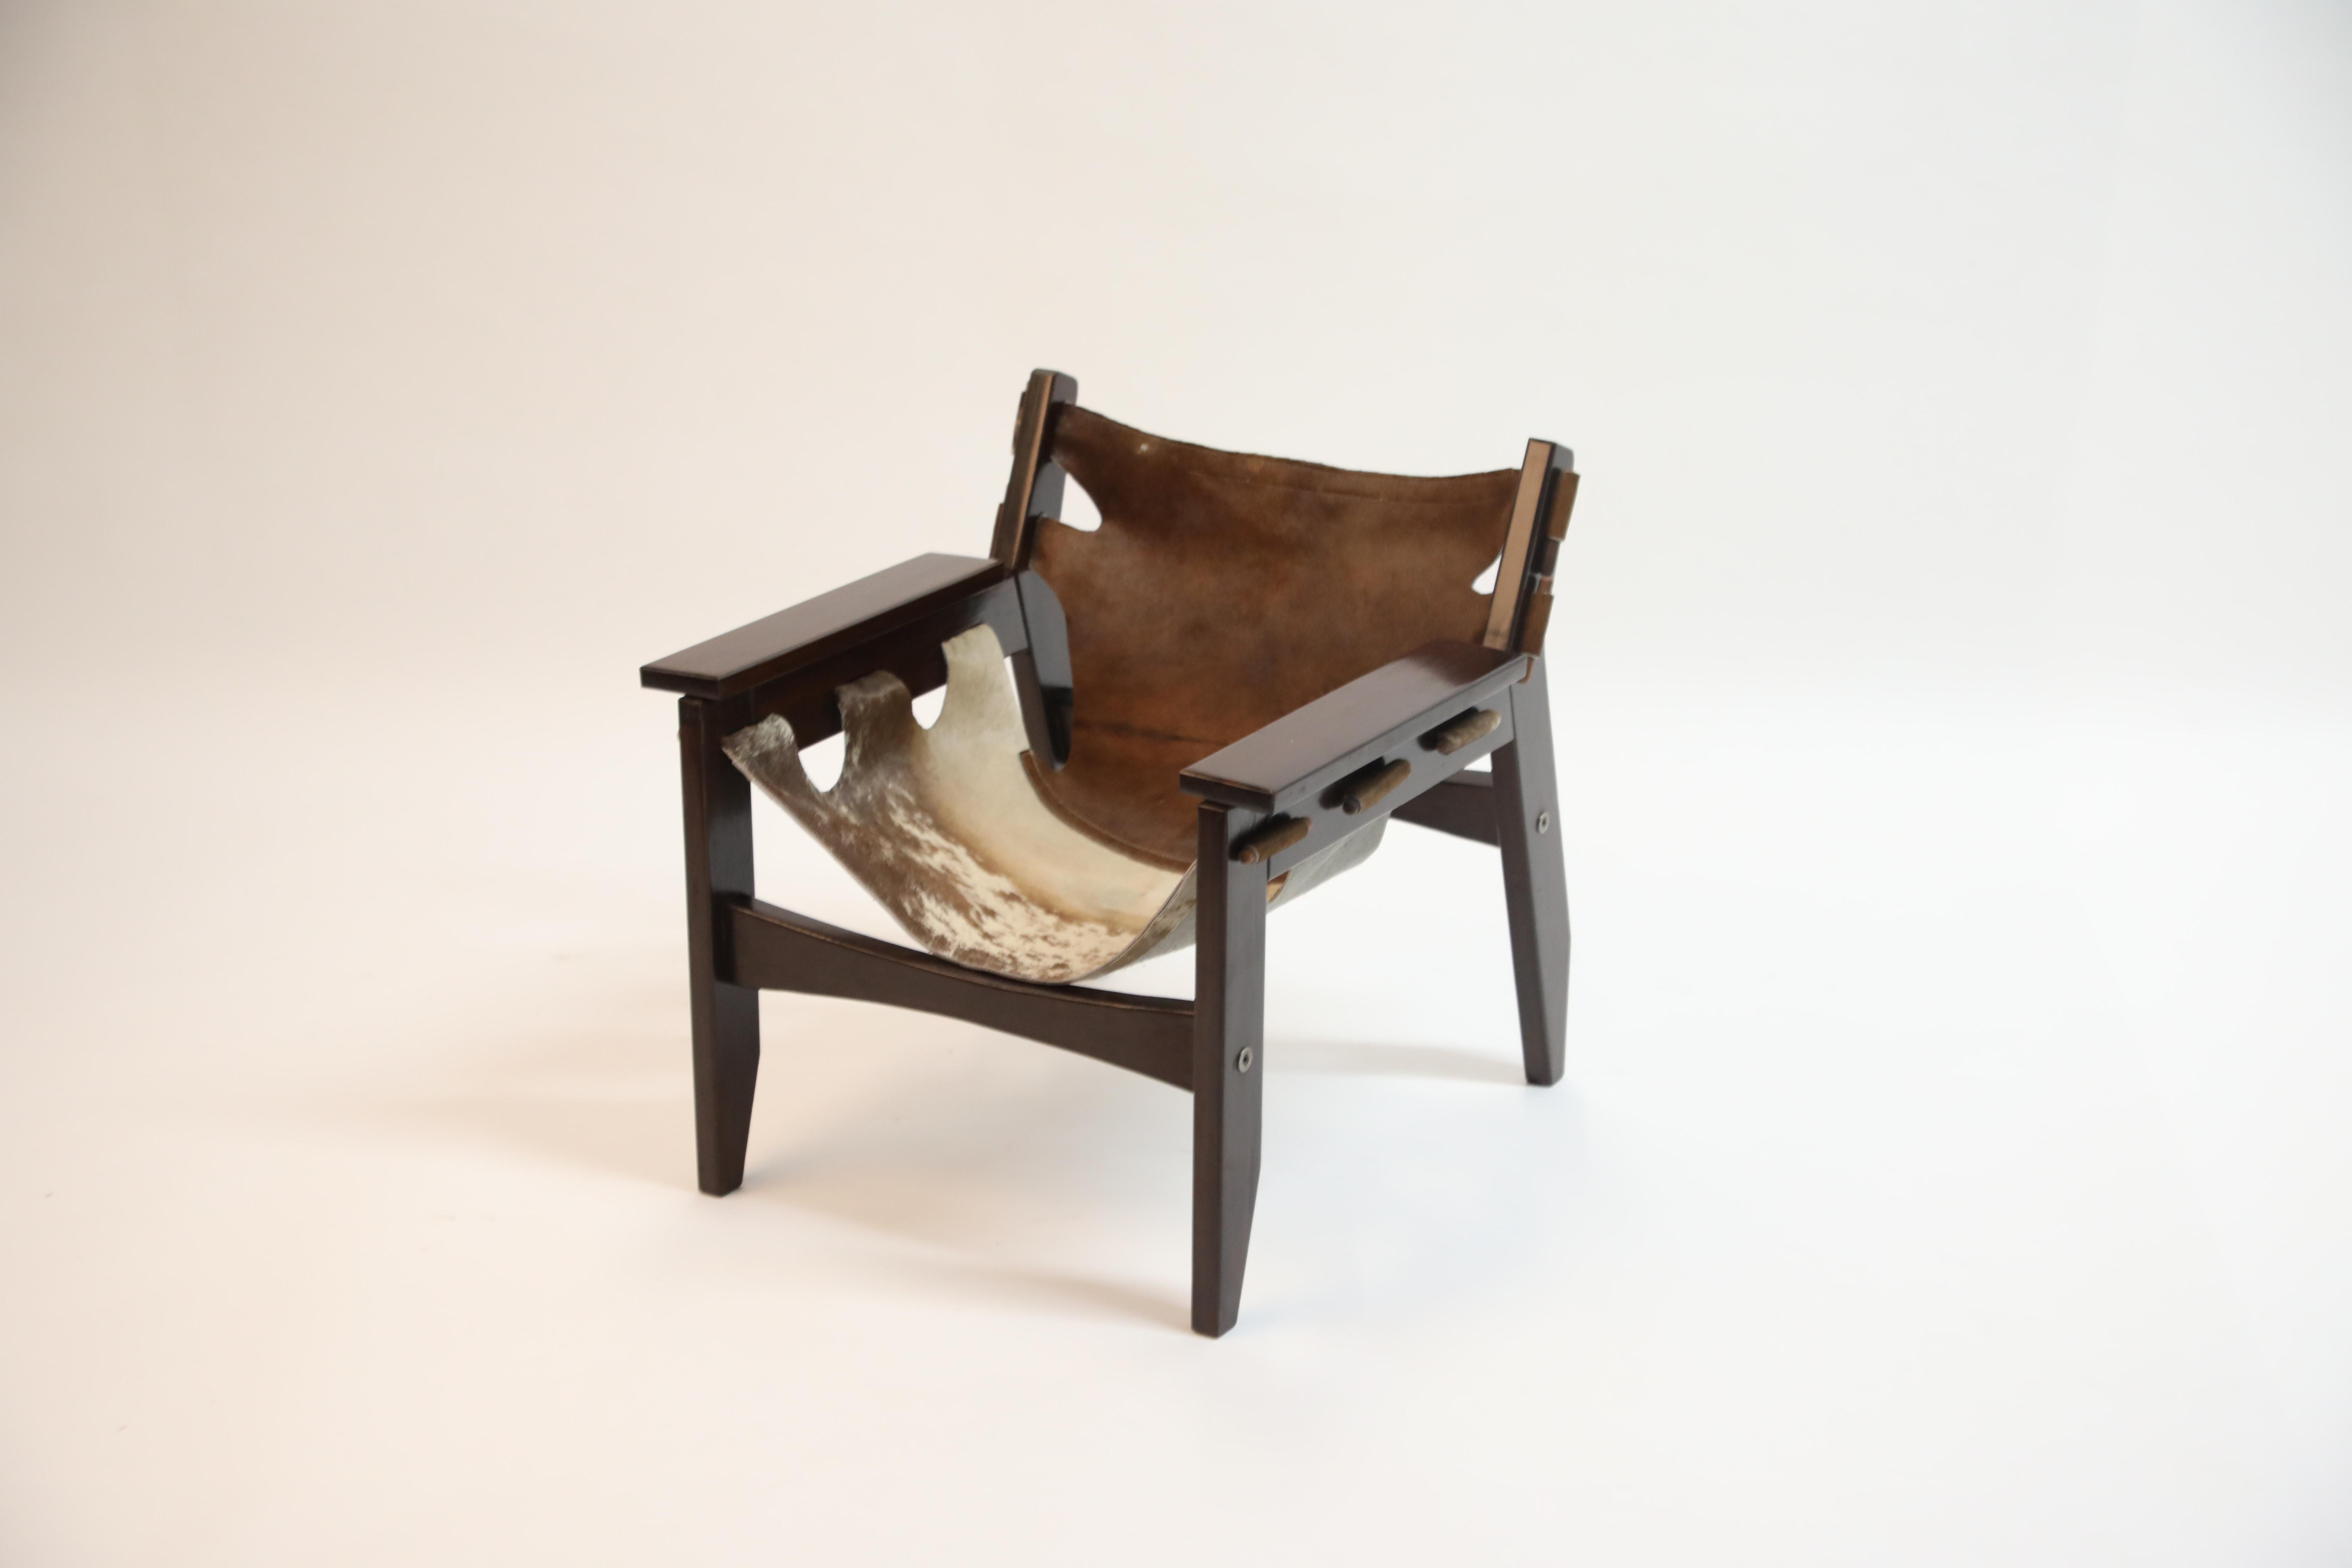 Leather Pair of Sergio Rodrigues Kilin Chairs in Rosewood and Cowhide, OCA, Brazil 1970s